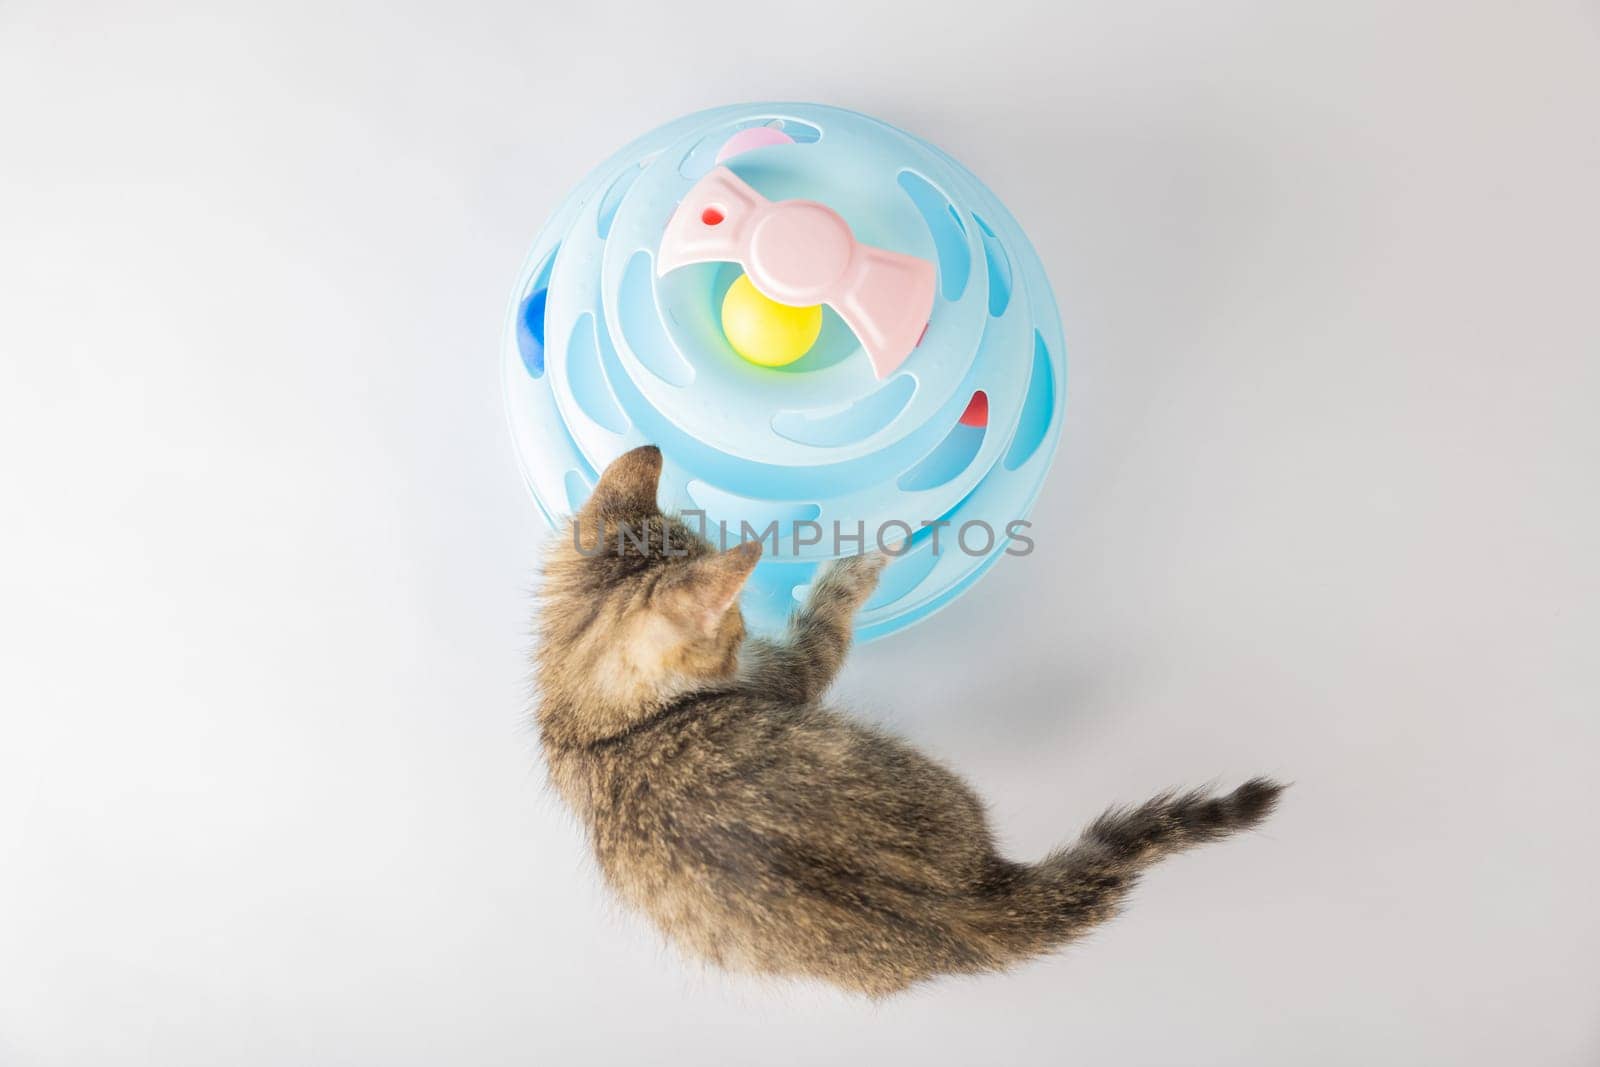 A young kitten's playful exploration with a blue toy pyramid spiral tower captures the essence of a happy pet. With a funny and adorable feline portrait, this cat's antics are bound to make you smile. by Sorapop